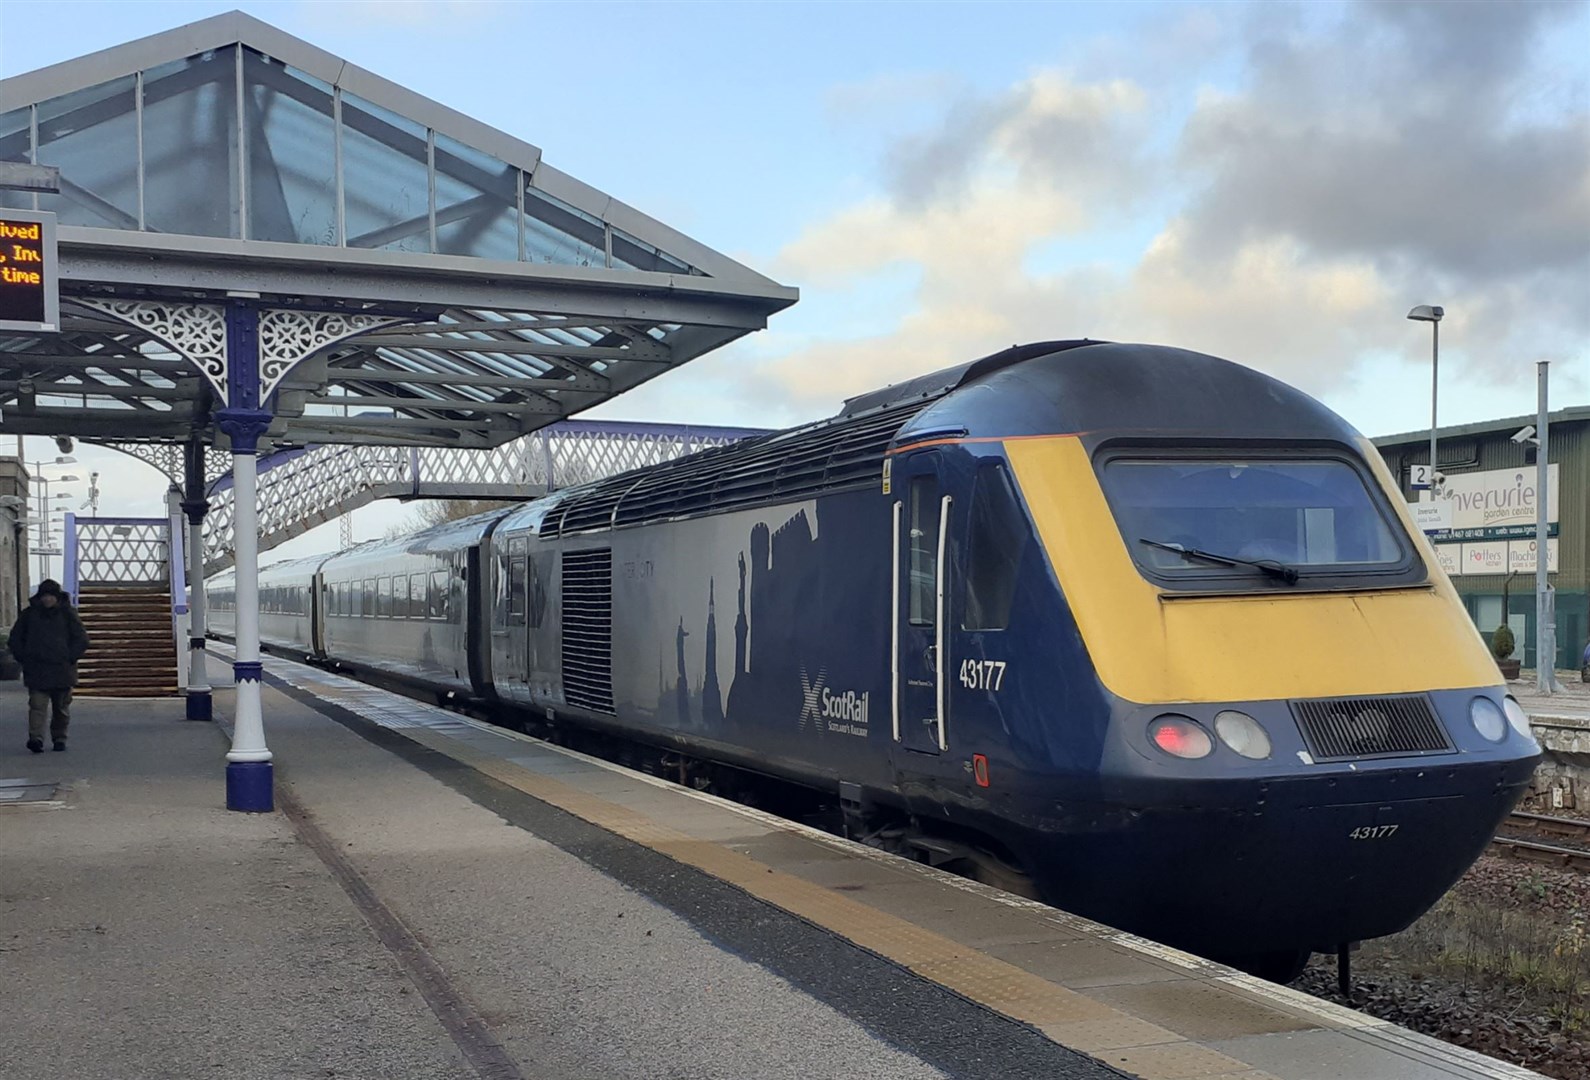 Business leaders raised concerns over the number of ScotRail cancellations due to “crew shortages” at the start of the tourist season.